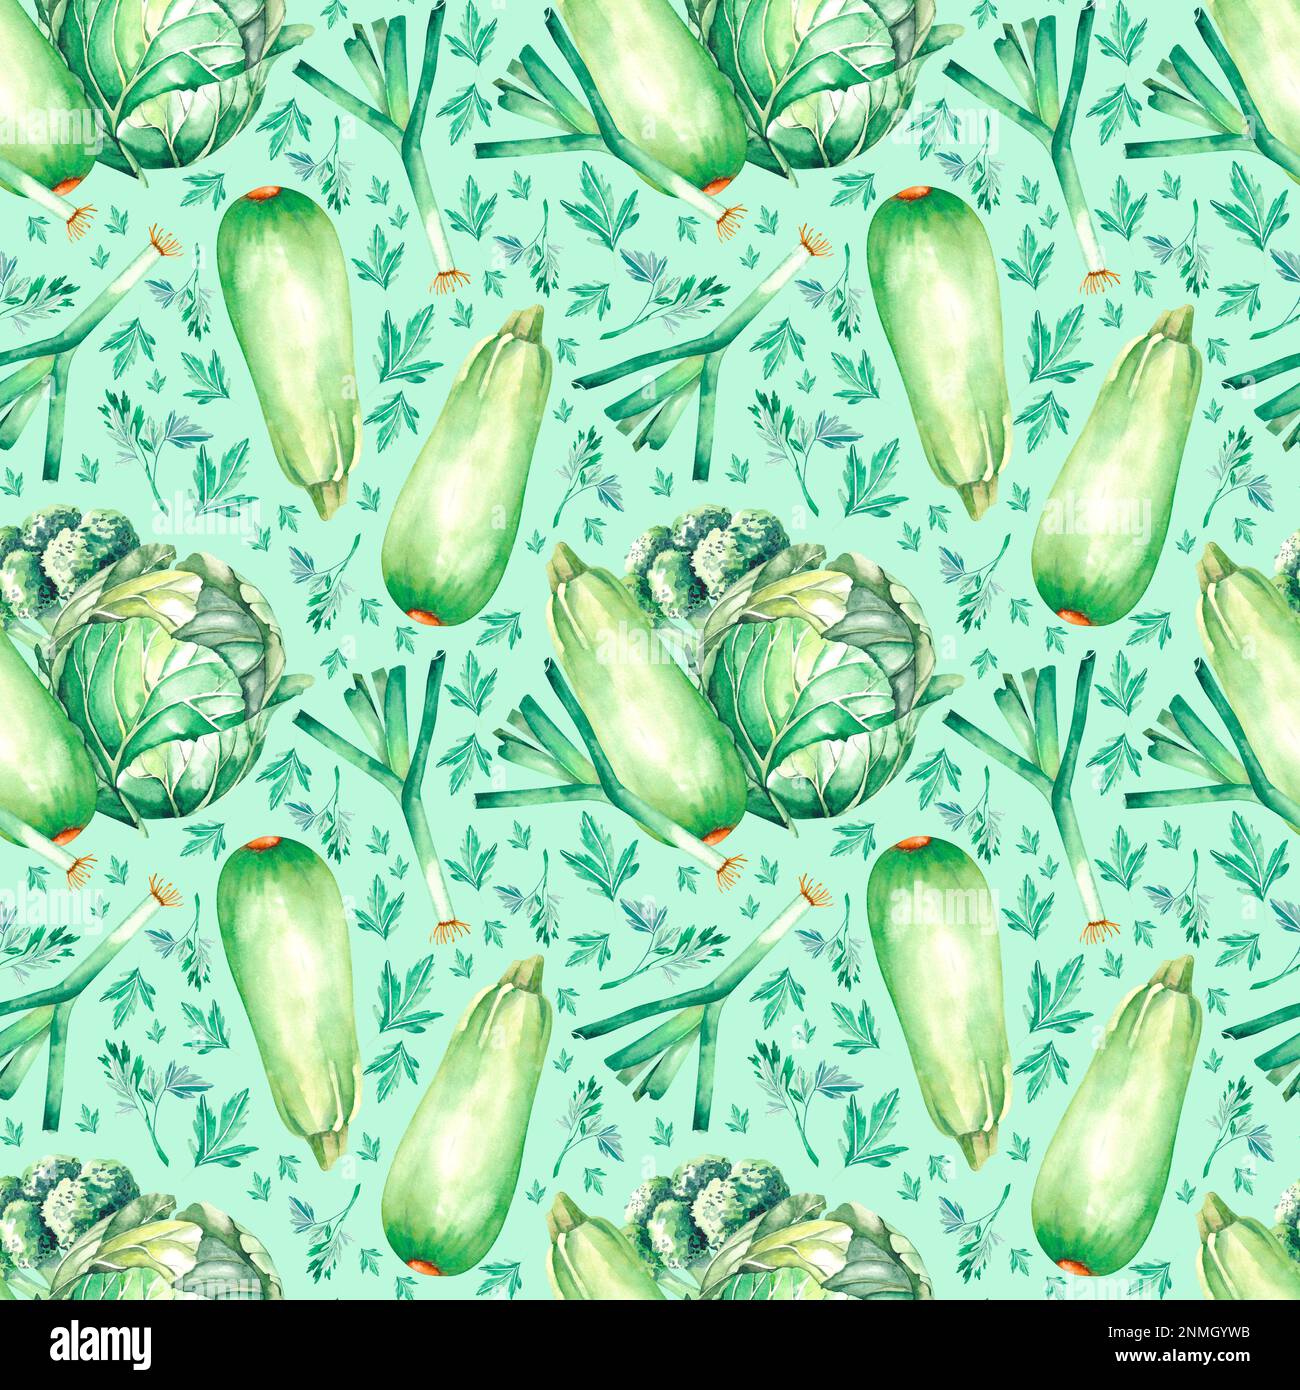 https://c8.alamy.com/comp/2NMGYWB/watercolor-green-pattern-of-vegetables-cabbage-cucumber-onion-zucchini-parsley-a-pattern-on-the-theme-of-vegetarianism-veganism-for-decorating-fa-2NMGYWB.jpg